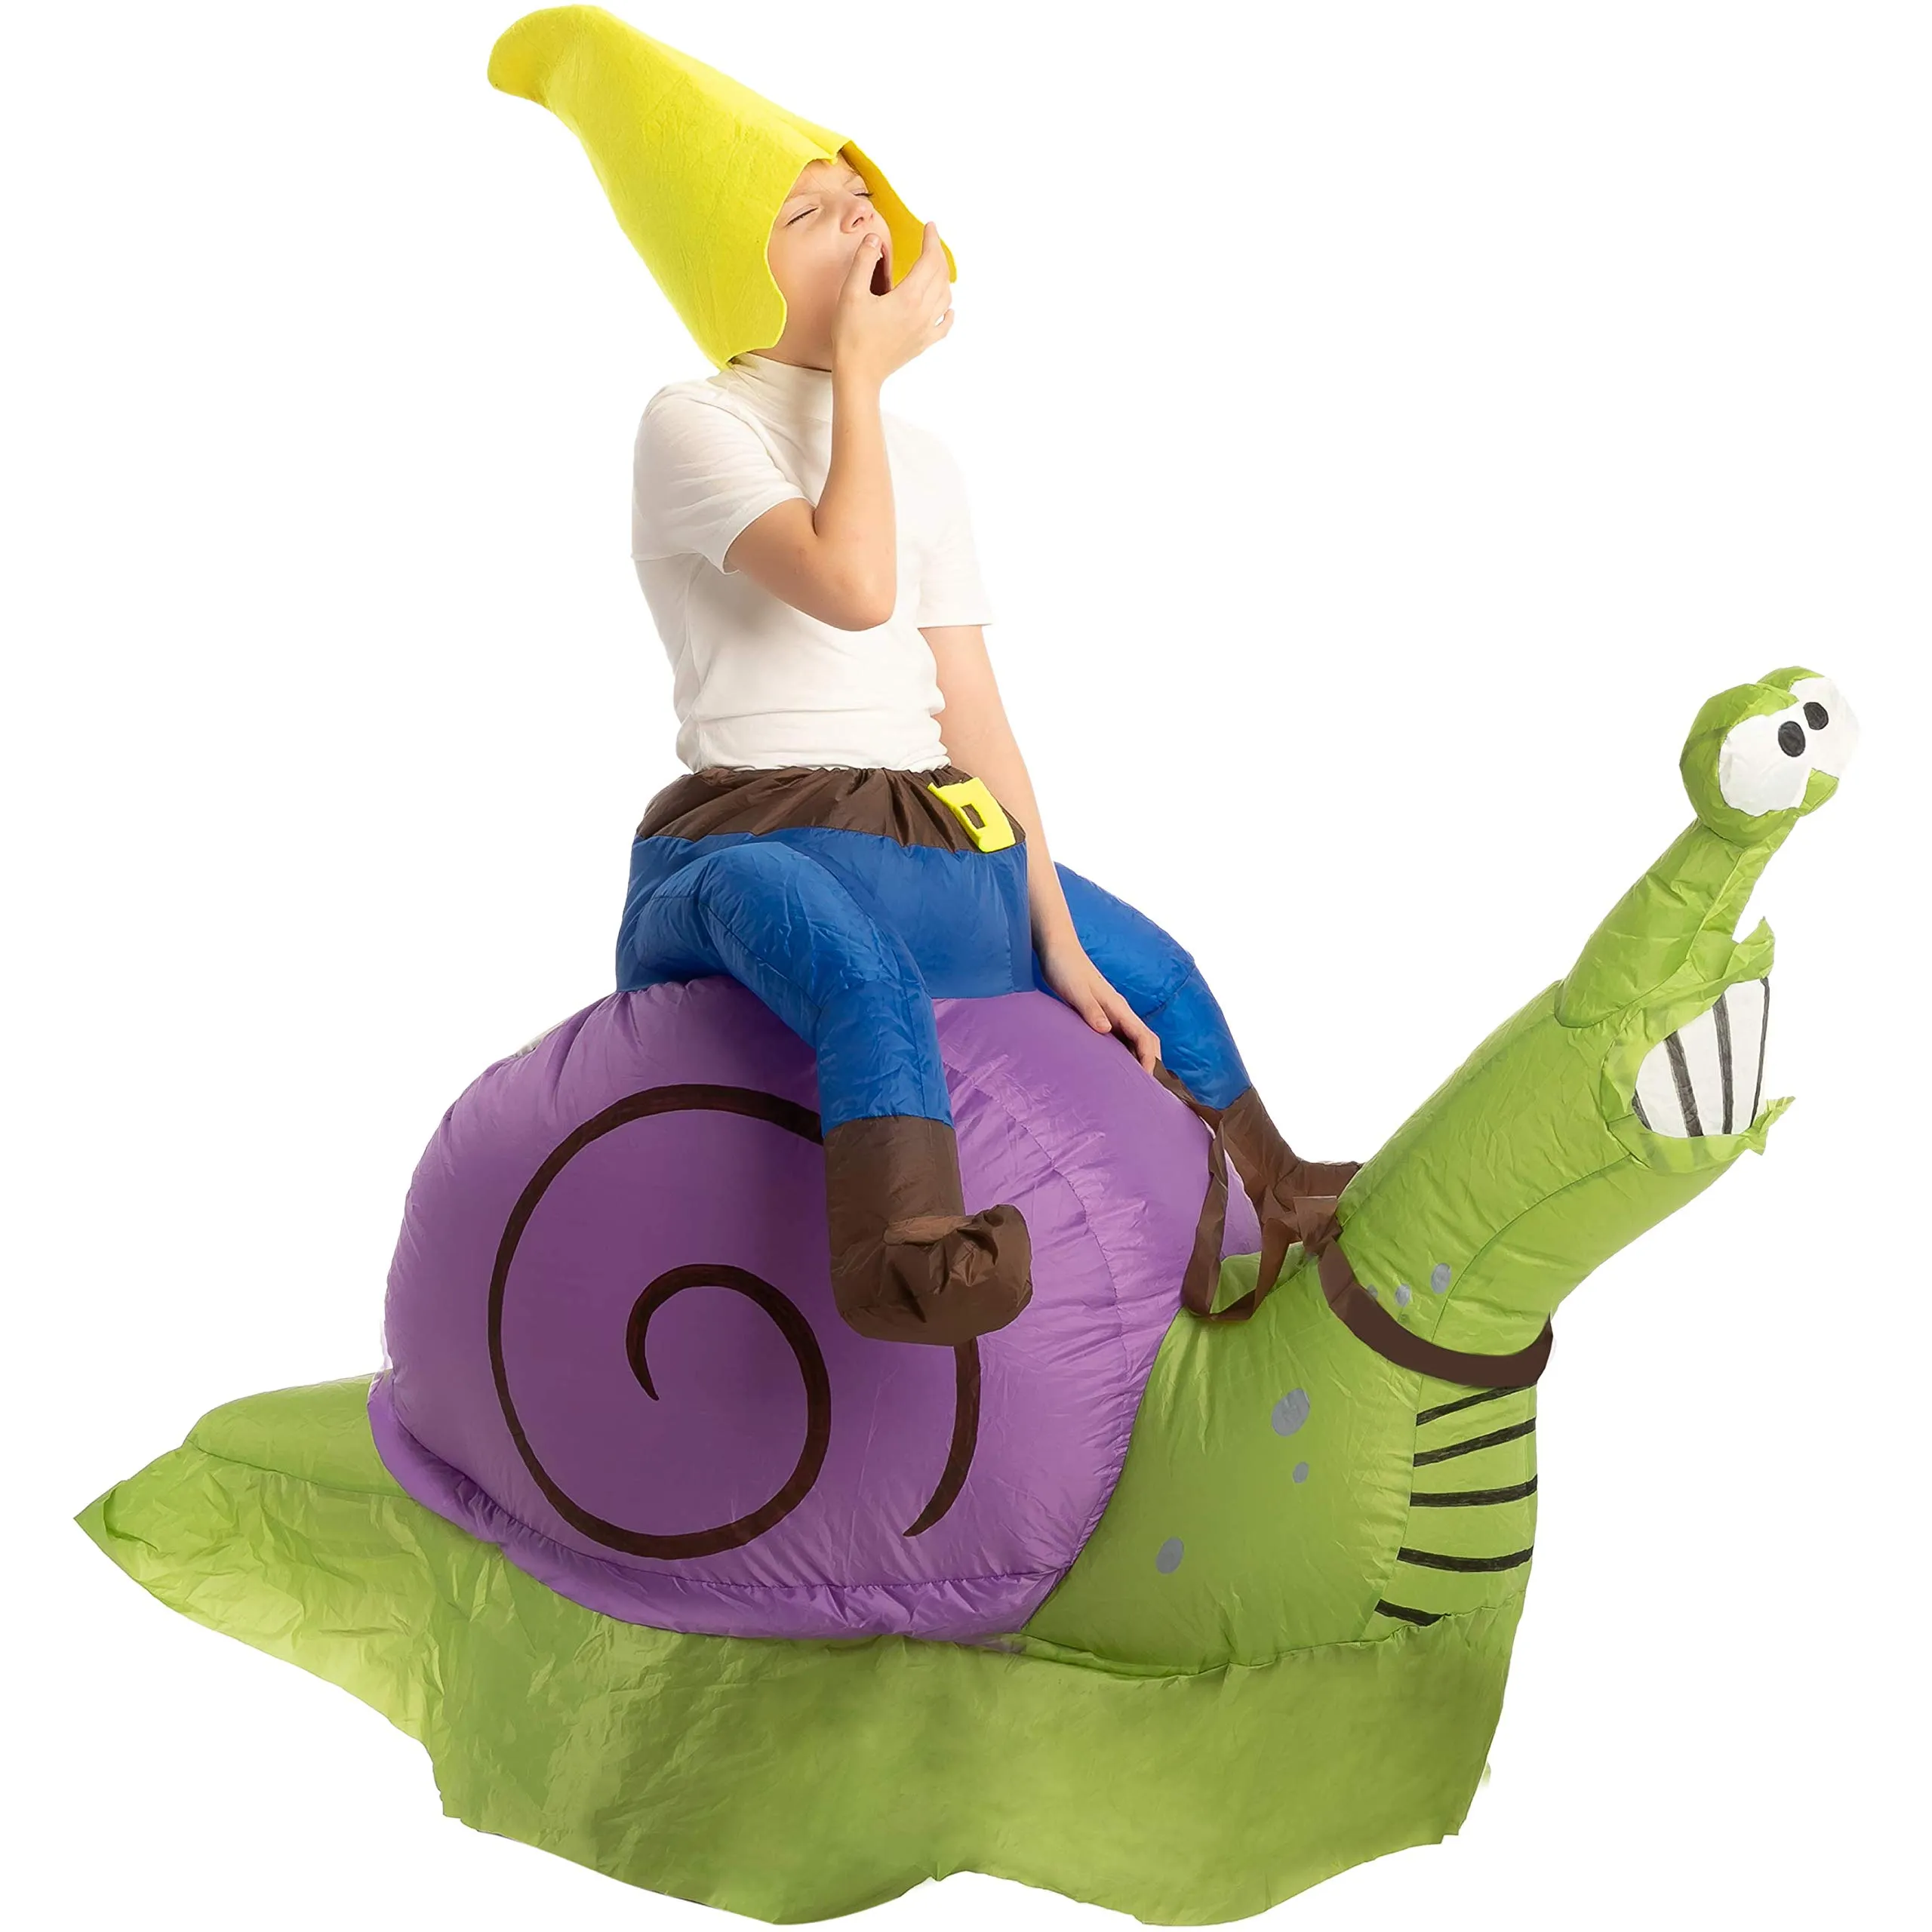 Kids riding snail blow up costume